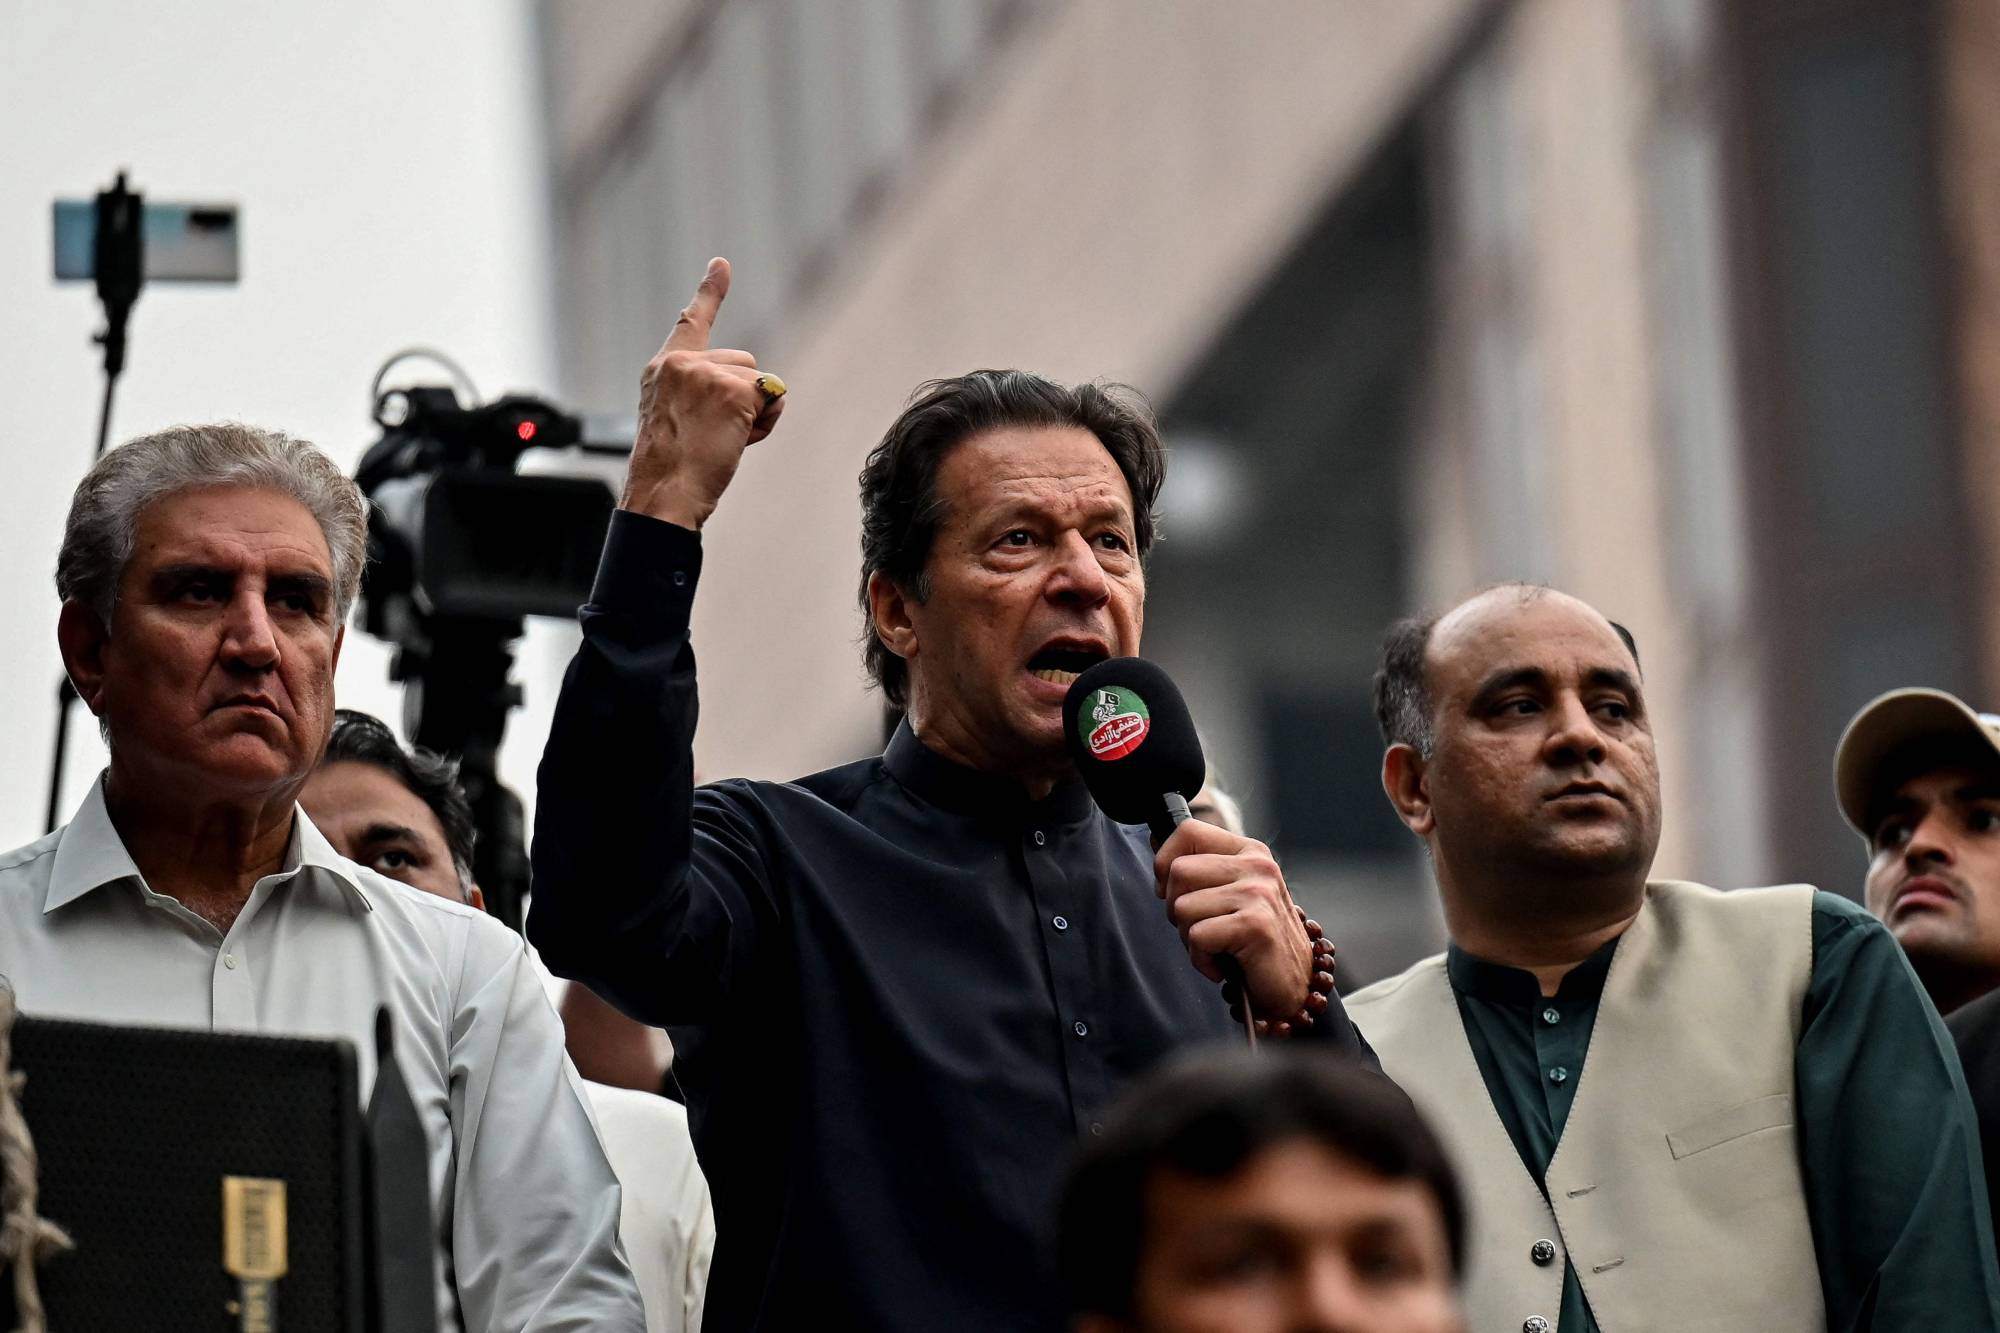 PTI Election Campaign to begin on March 4: Imran Khan